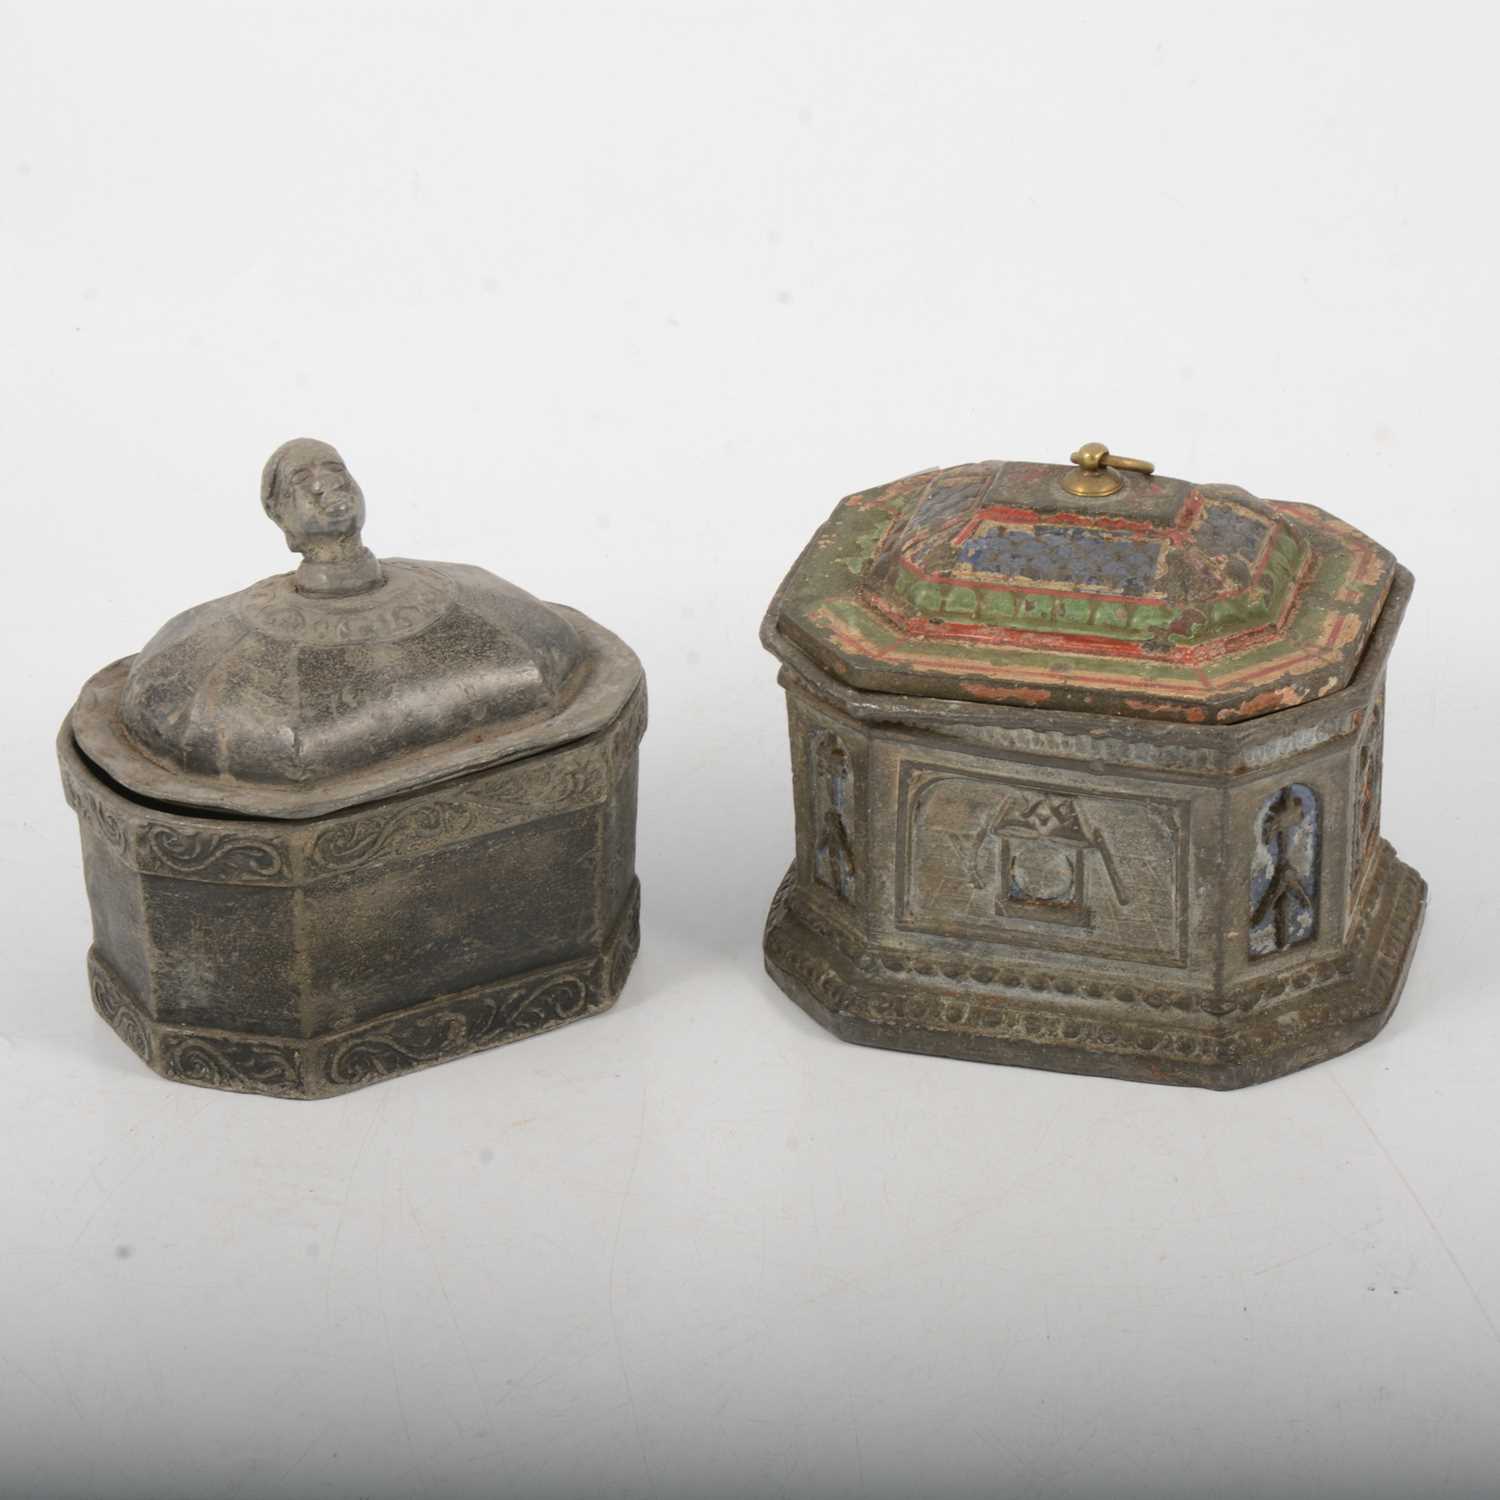 Lot 143 - Two early 19th century lead tobacco boxes, one with damper.